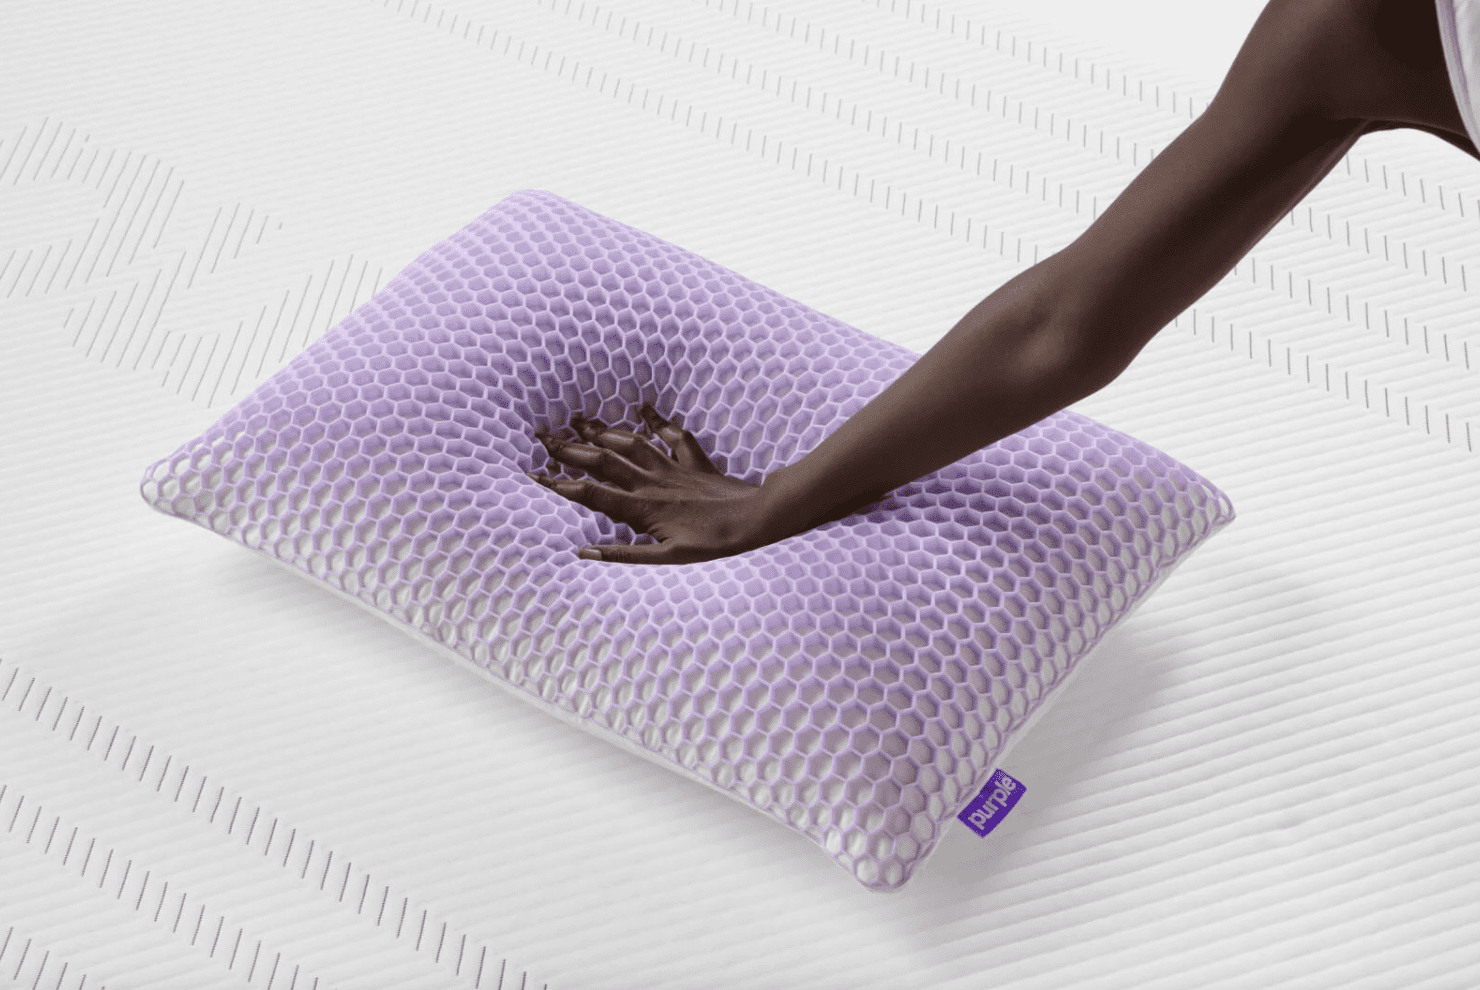 https://cdn.apartmenttherapy.info/image/upload/v1631818005/gen-workflow/product-database/purple-harmony-pillow.png